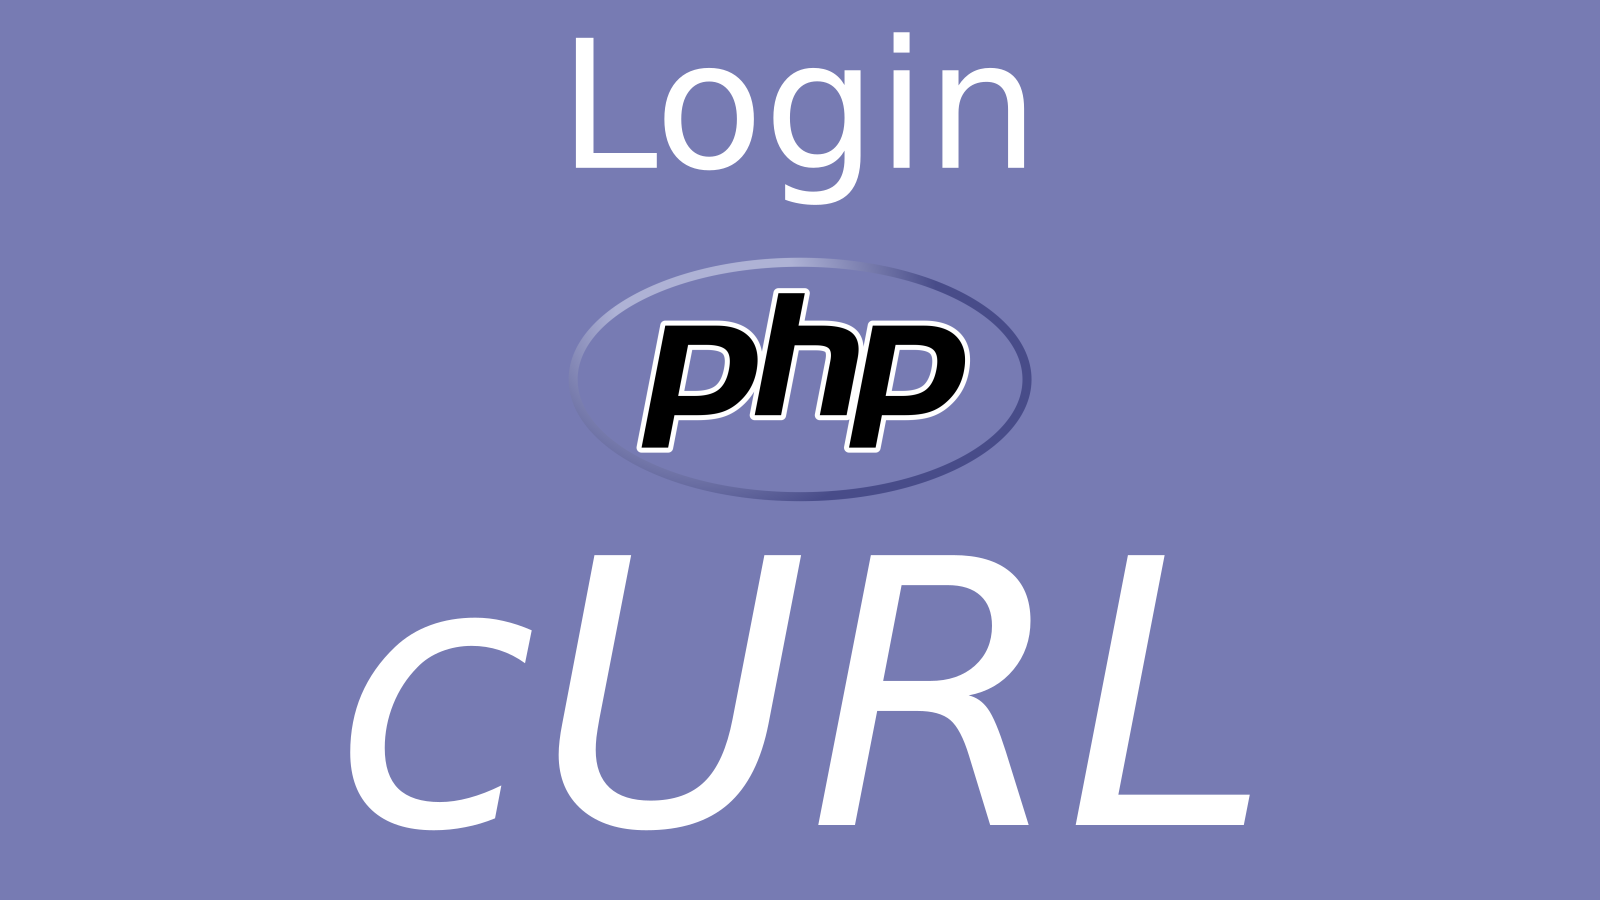 Php curl get. Curl php.